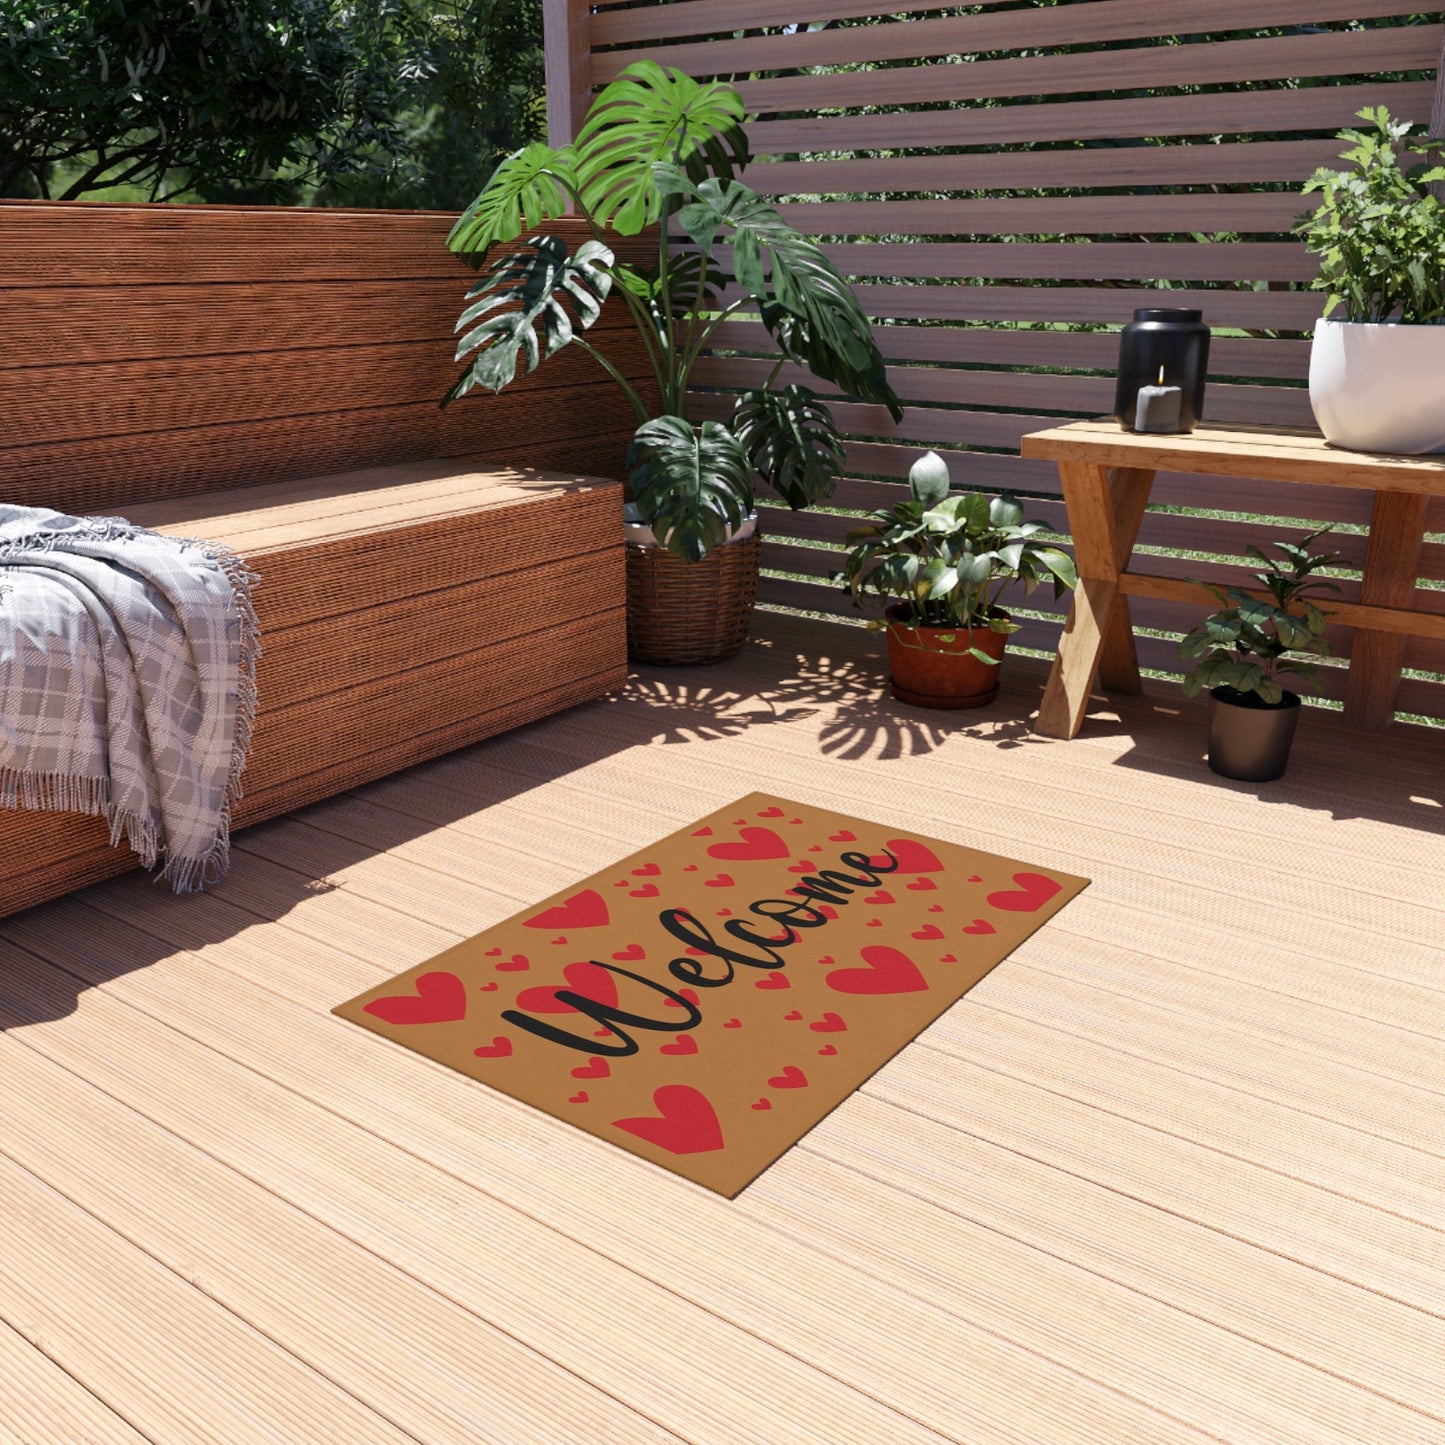 Get trendy with Valentine's Day Outdoor Rug - Home Decor available at Good Gift Company. Grab yours for $27.72 today!